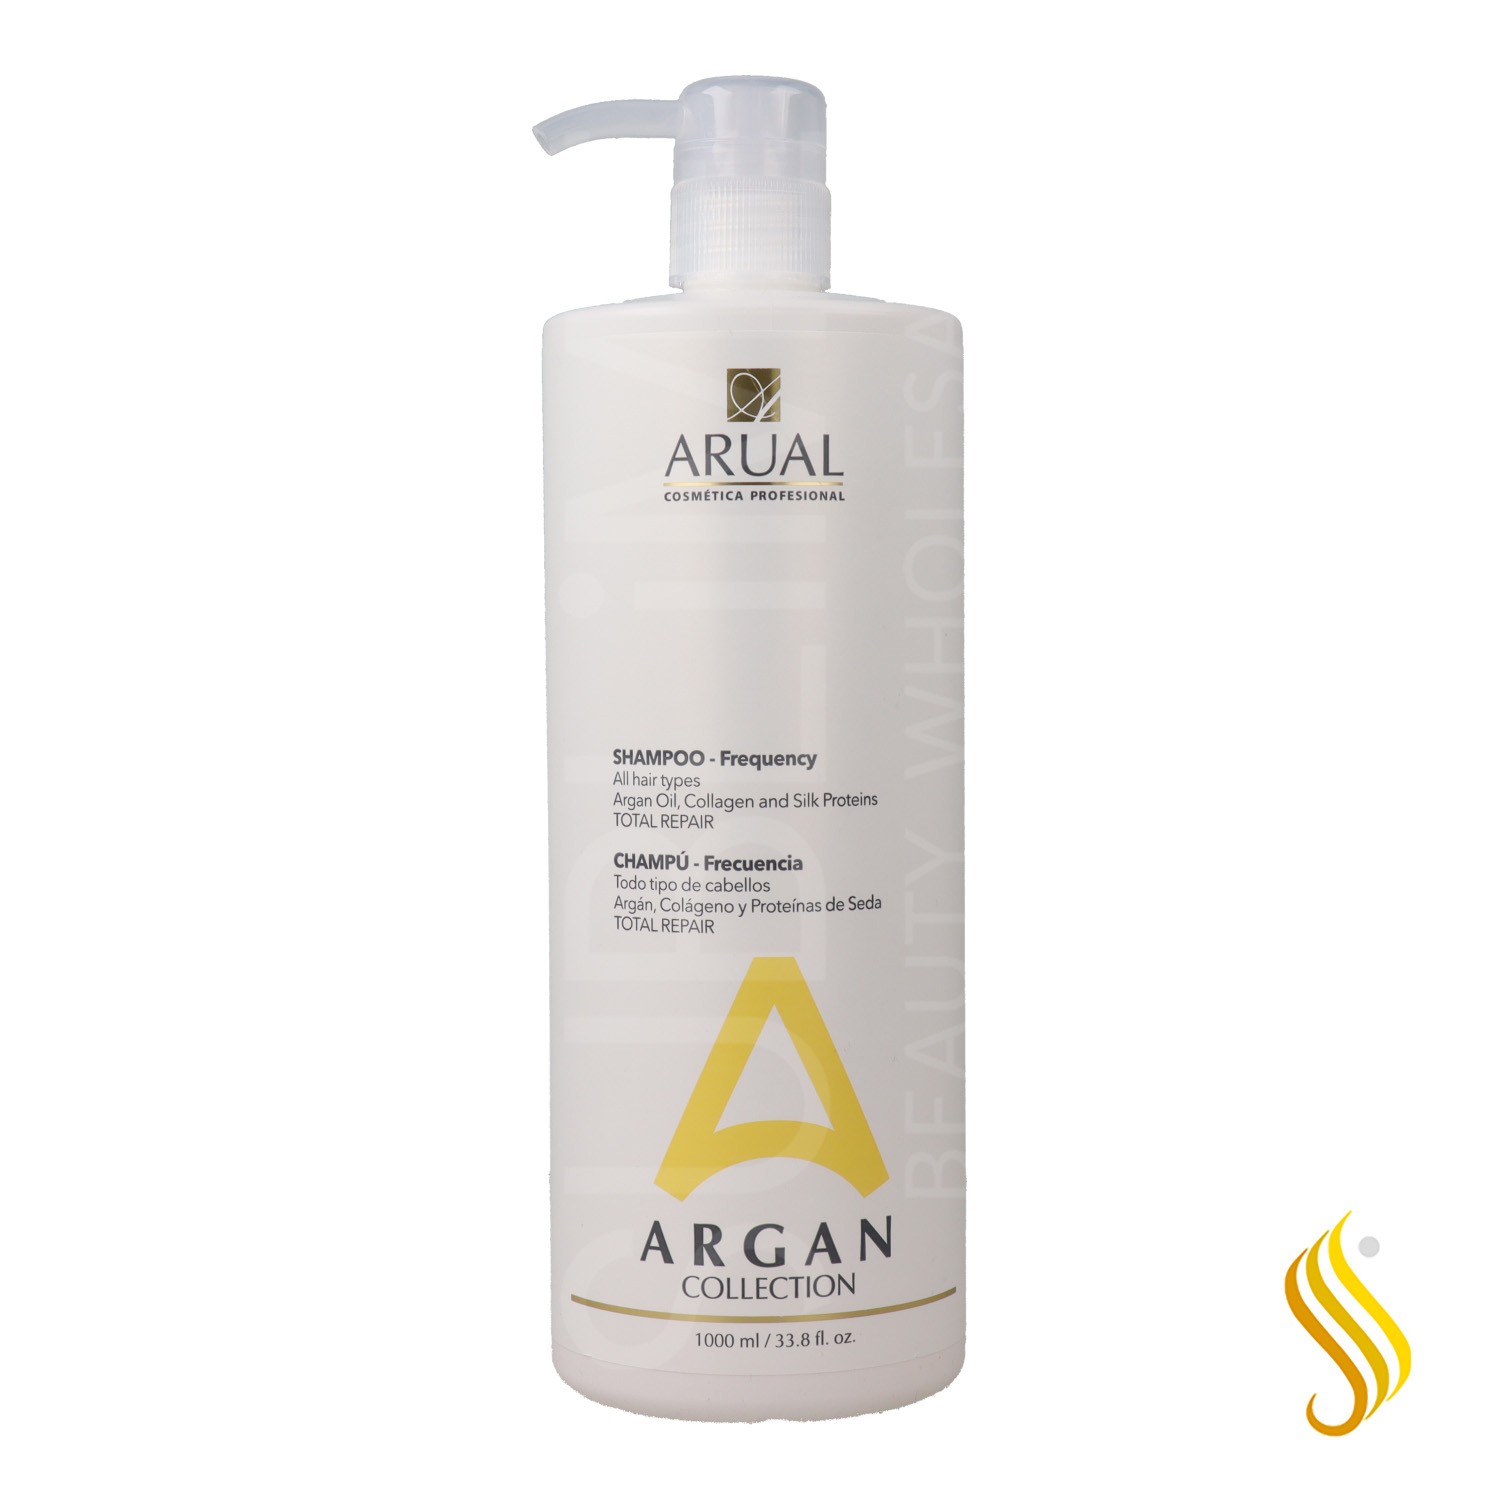 Arual Argan Collection Shampooing Fréquence 1000 ml